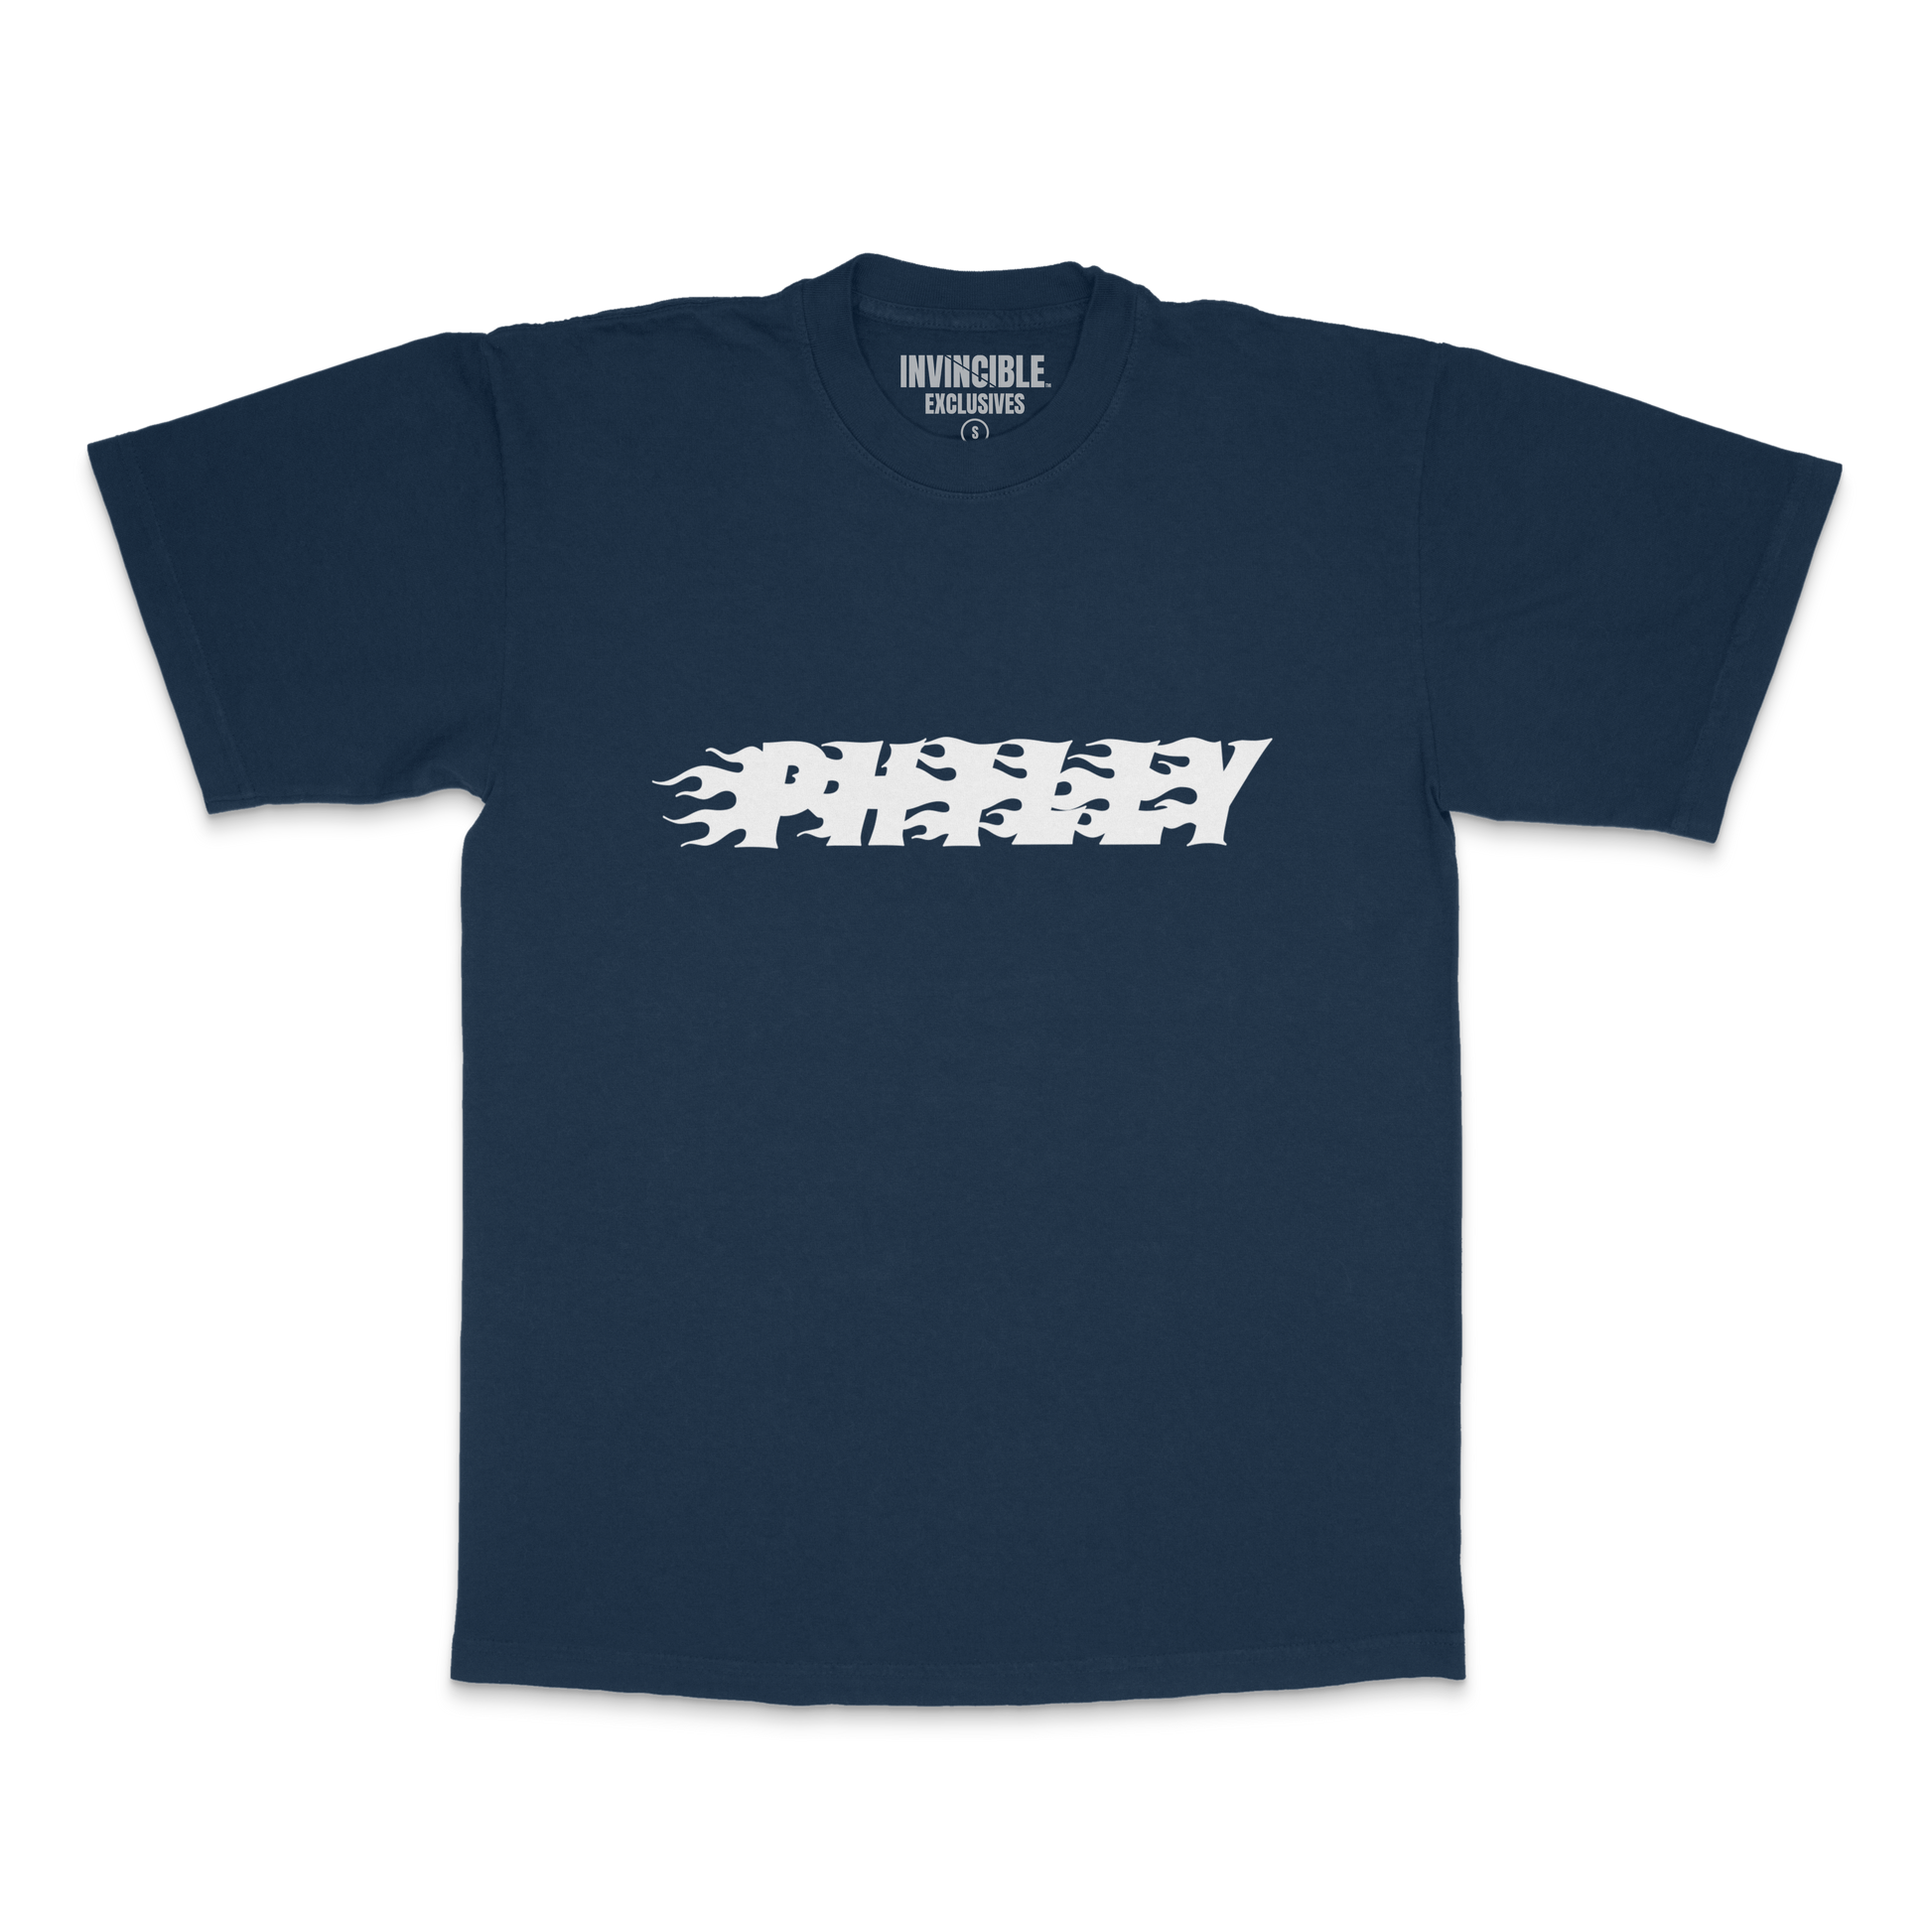 Invincible Exclusives Philly T-Shirt - Navy